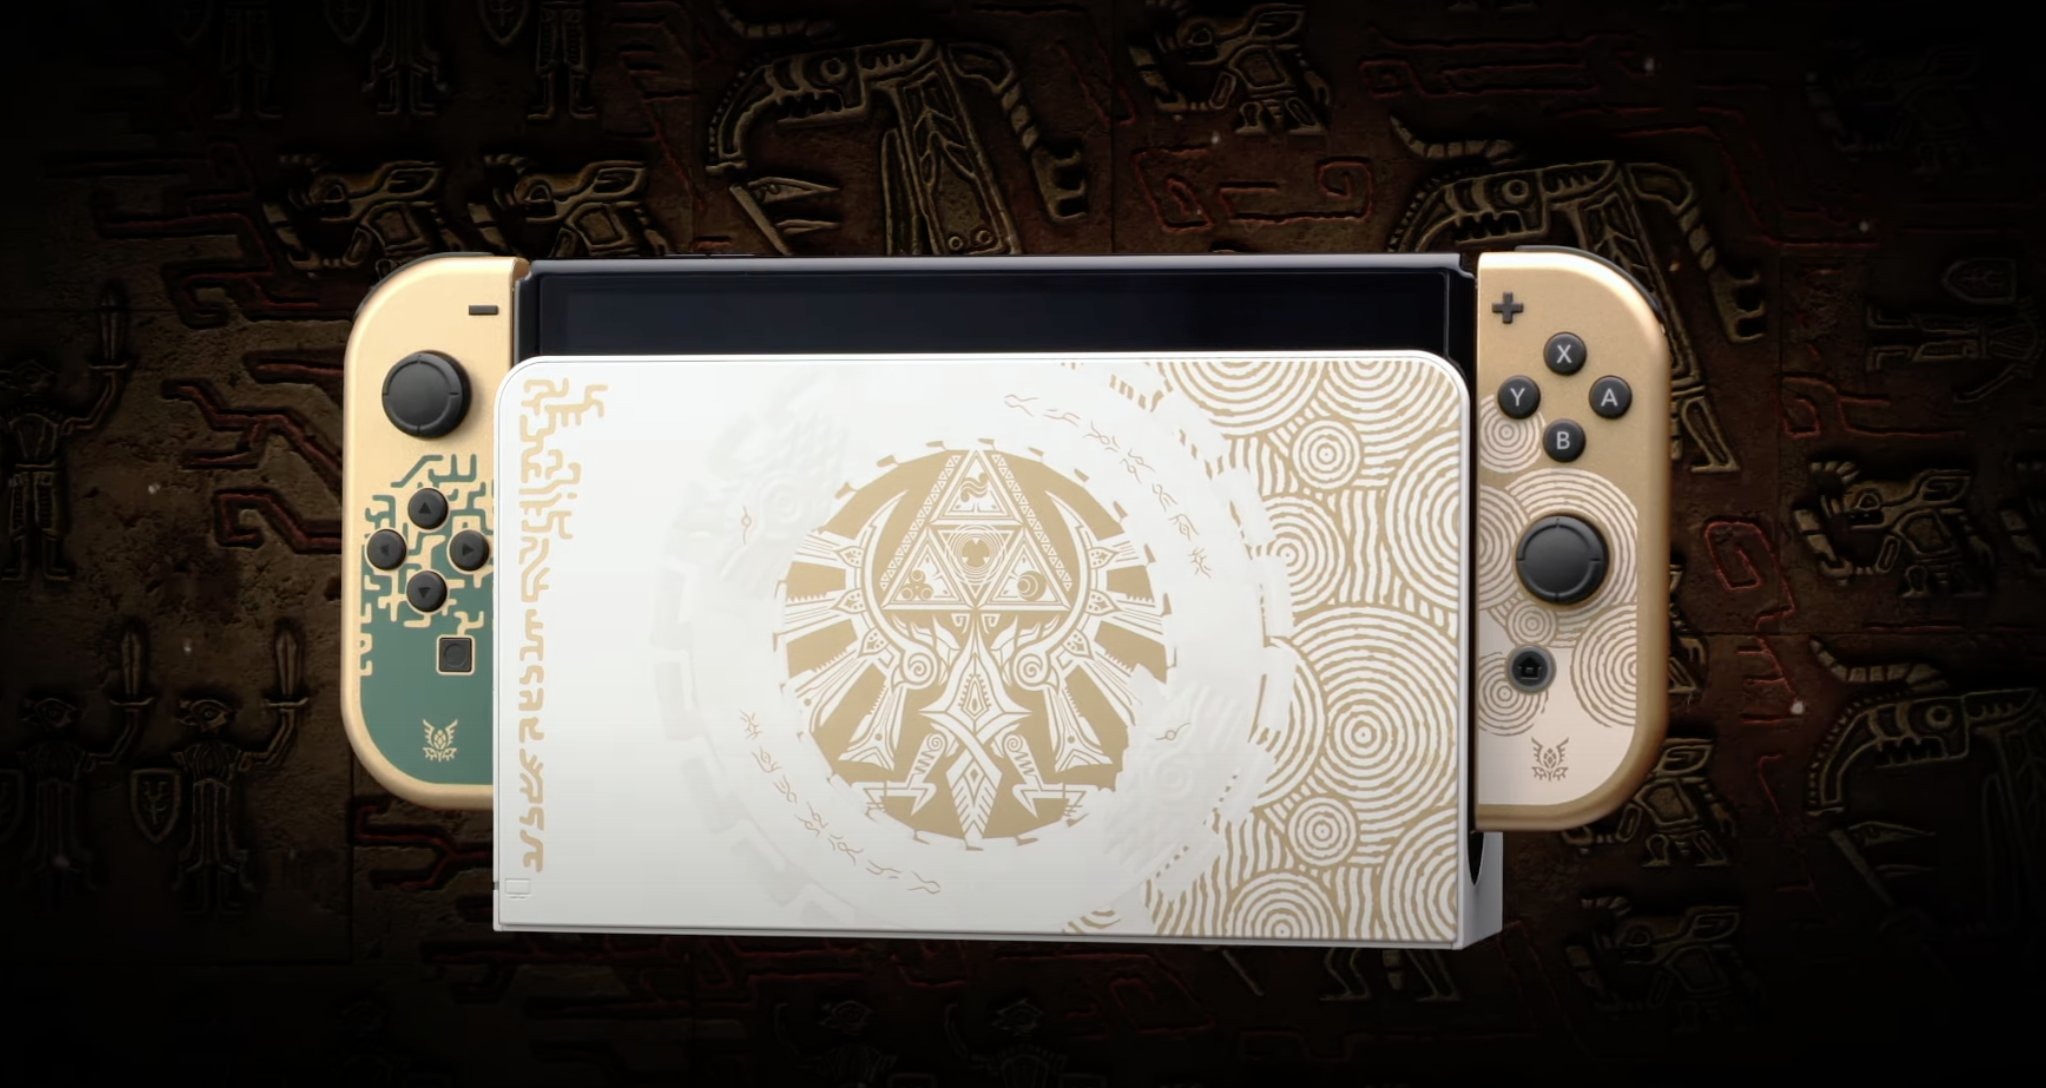 Switch OLED édition The Legend of Zelda - Tears of the Kingdom : où l'acheter ? - Le CrocoDeal